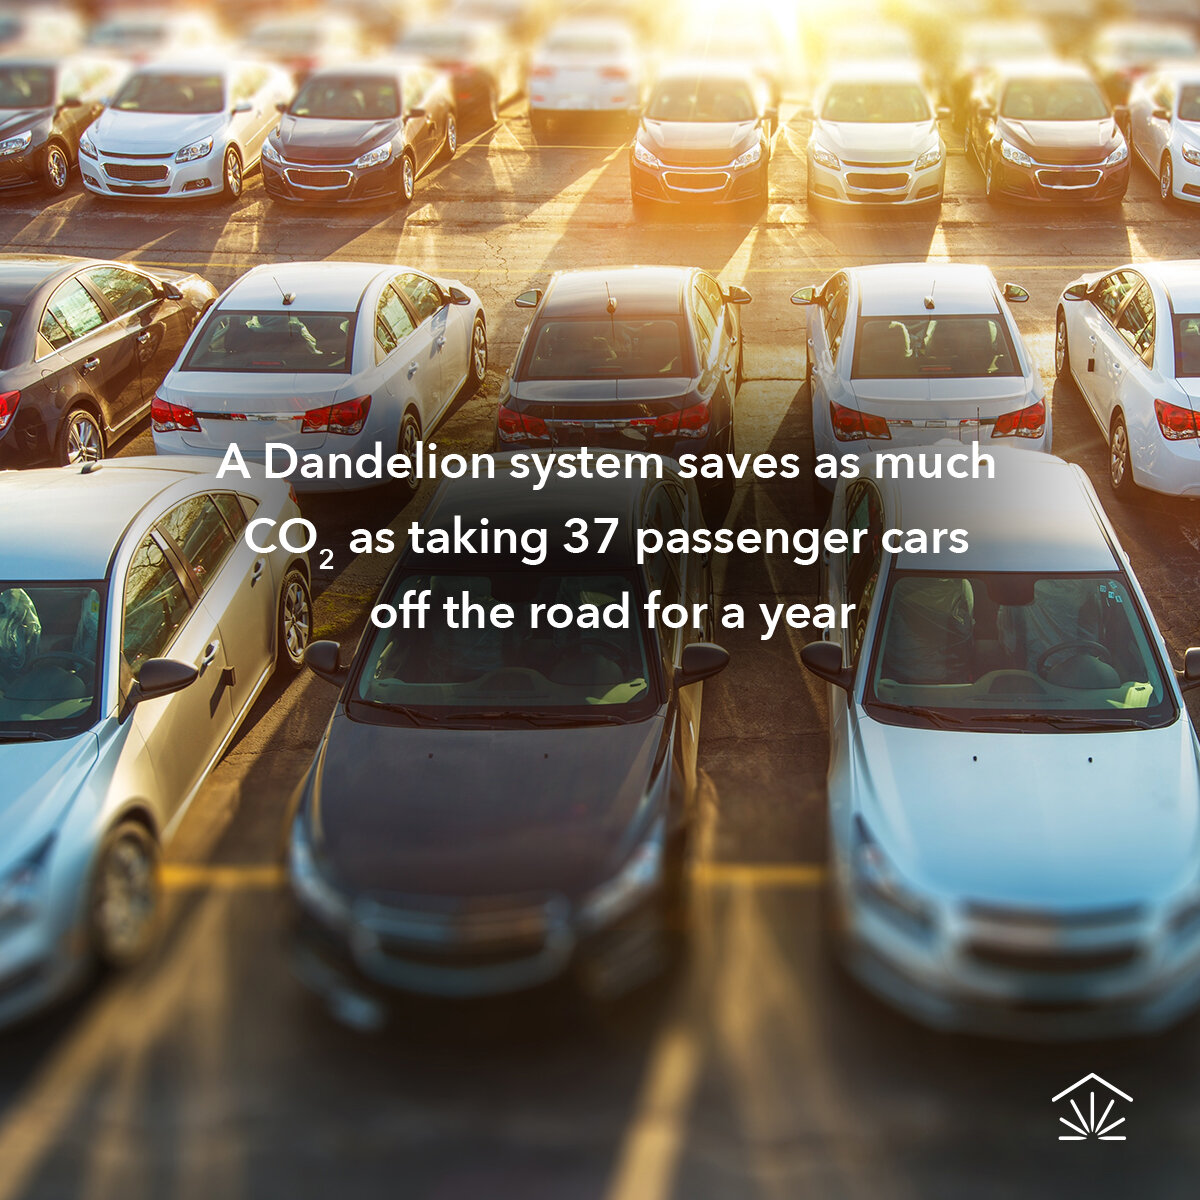 A photograph of cars in a lot with the text 'A Dandelion system saves as much CO2 as taking 27 passenger cars off the road for a year.'